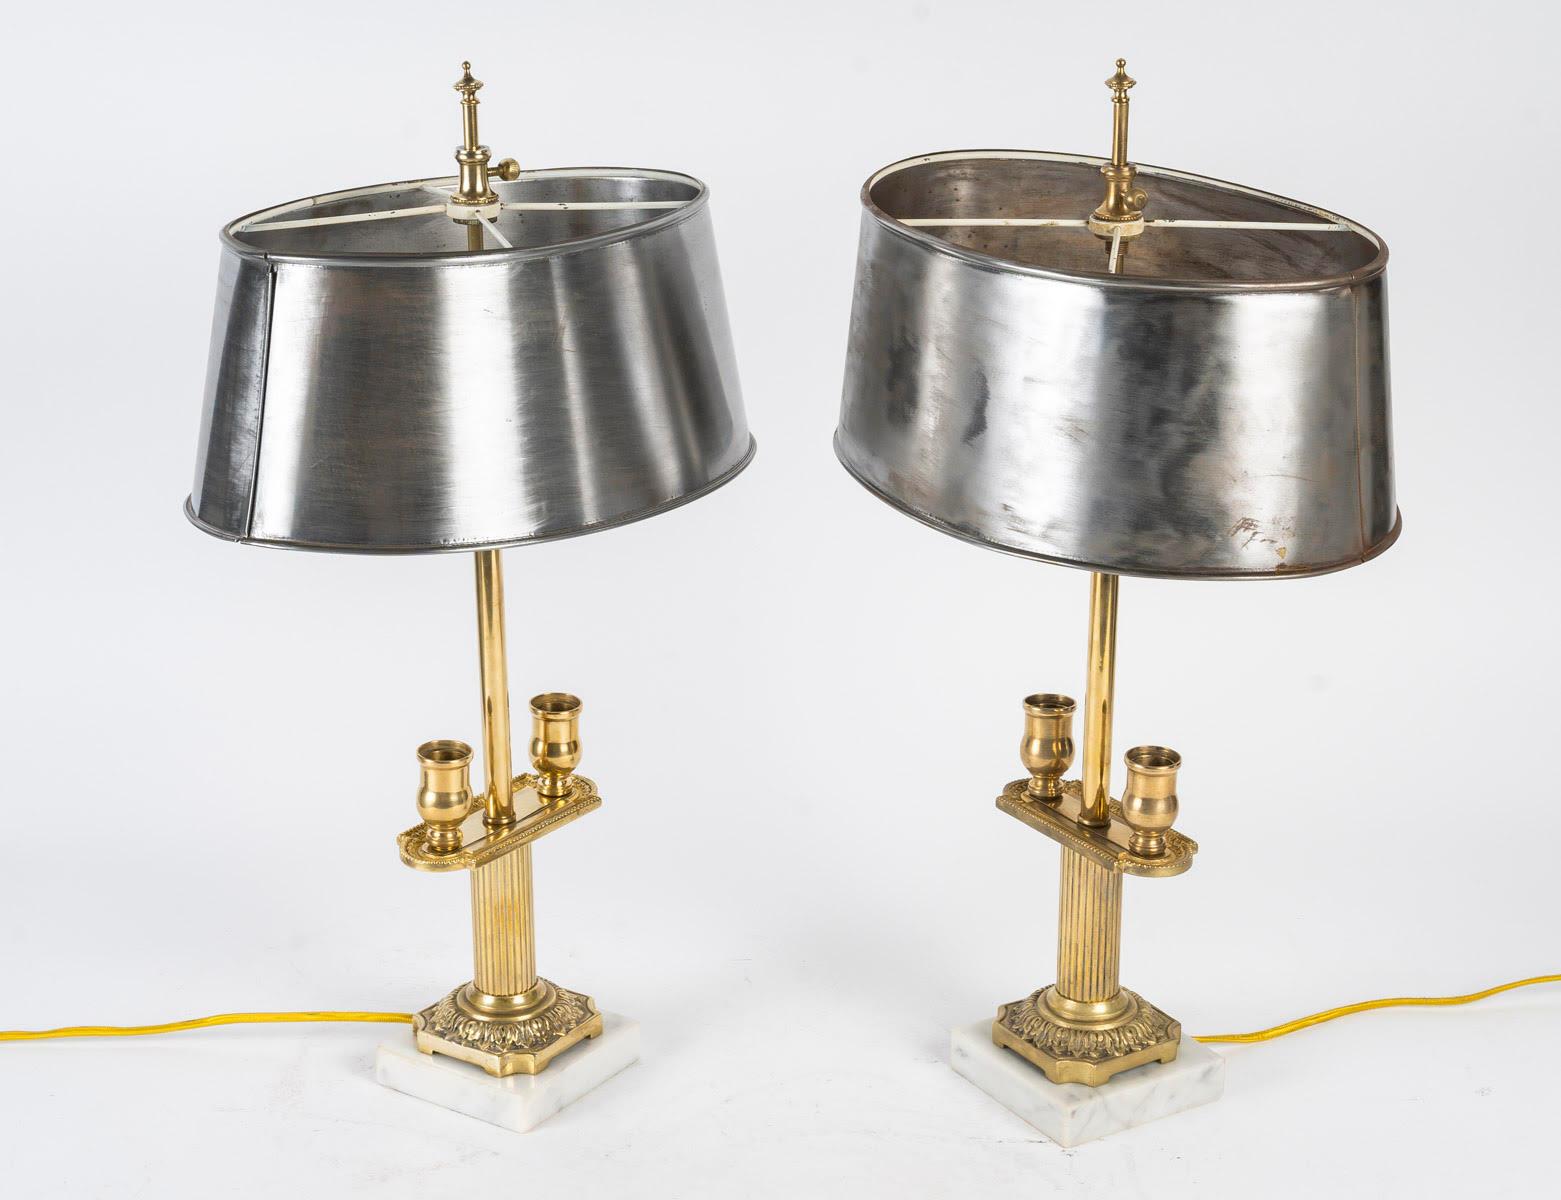 Pair of candlesticks mounted as table lamps, 19th century, Napoleon III period.

Pair of bronze candlesticks, marble base, steel shade, 19th century, Napoleon III period, 2 lights under the shade.
H: 48cm, W: 28cm, D: 17cm